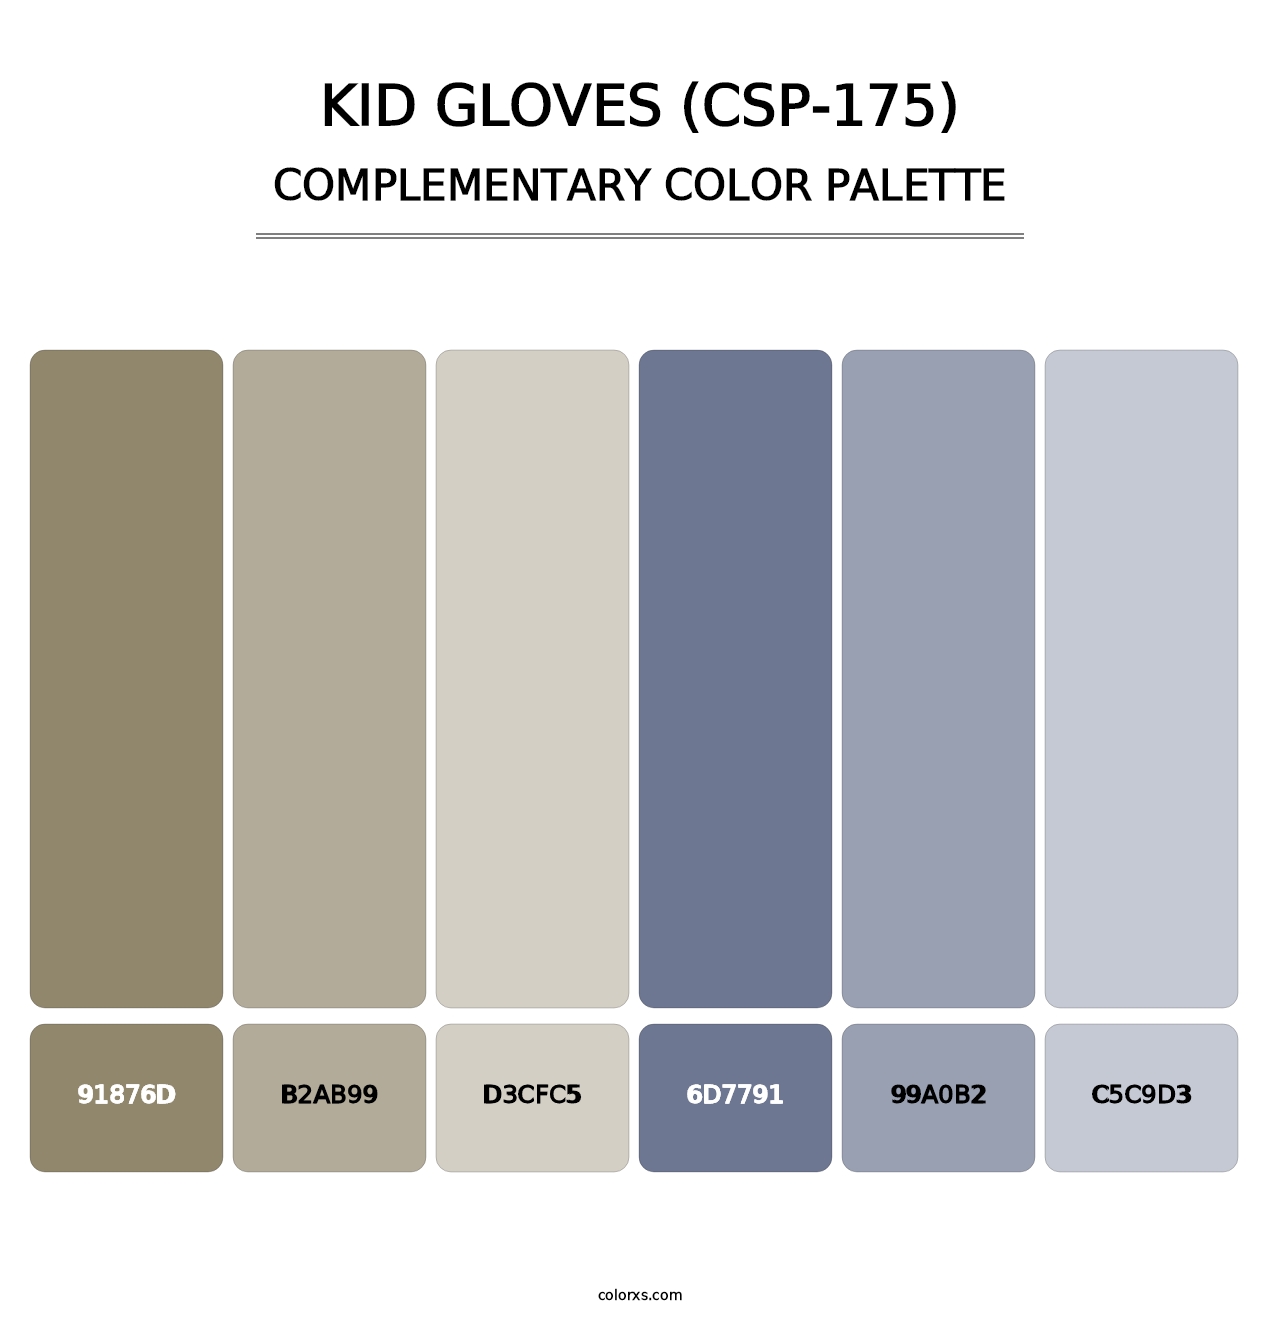 Kid Gloves (CSP-175) - Complementary Color Palette